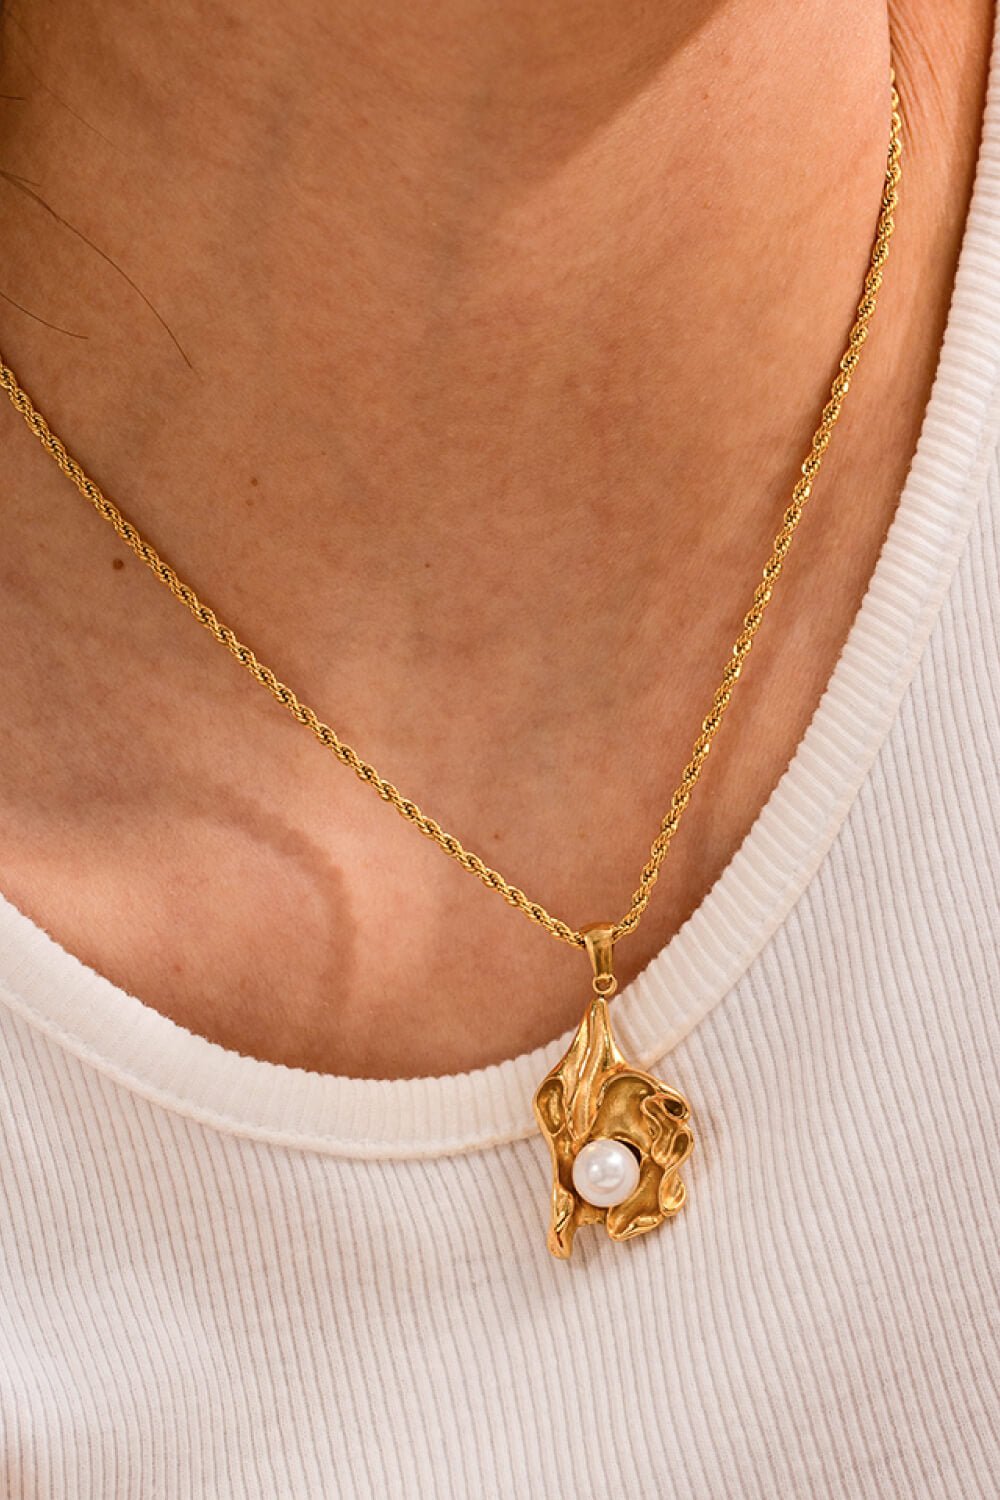 Pearl Trim Pendant Gold-Plated NecklaceNecklaceBeach Rose Co.